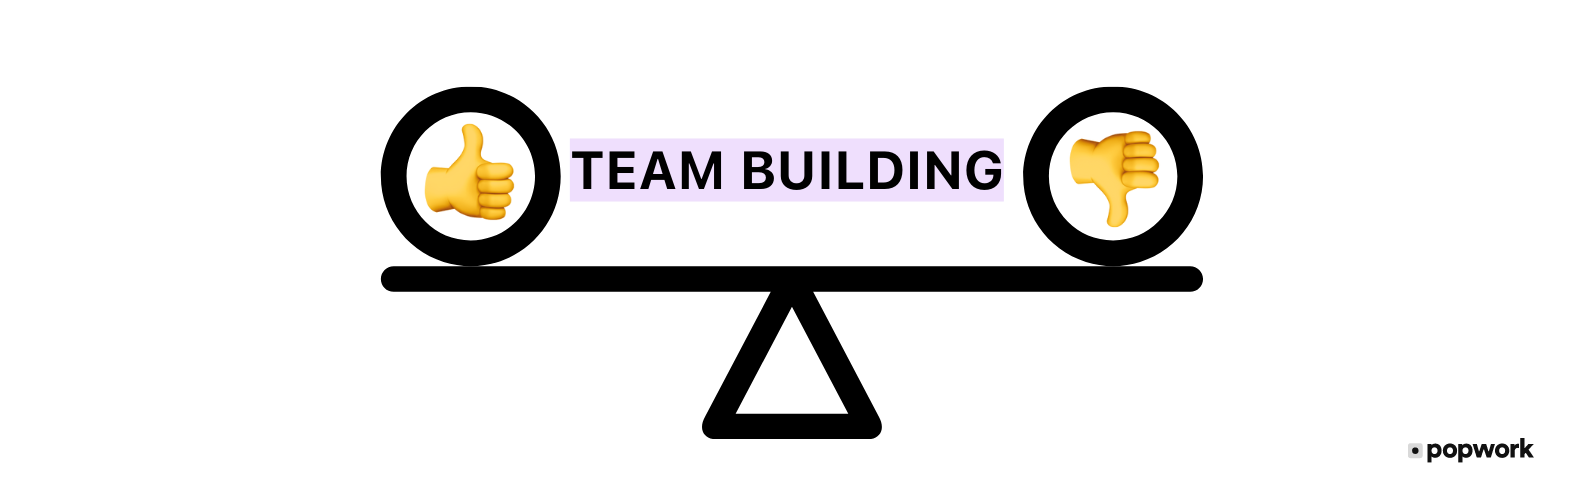 team building pros and cons